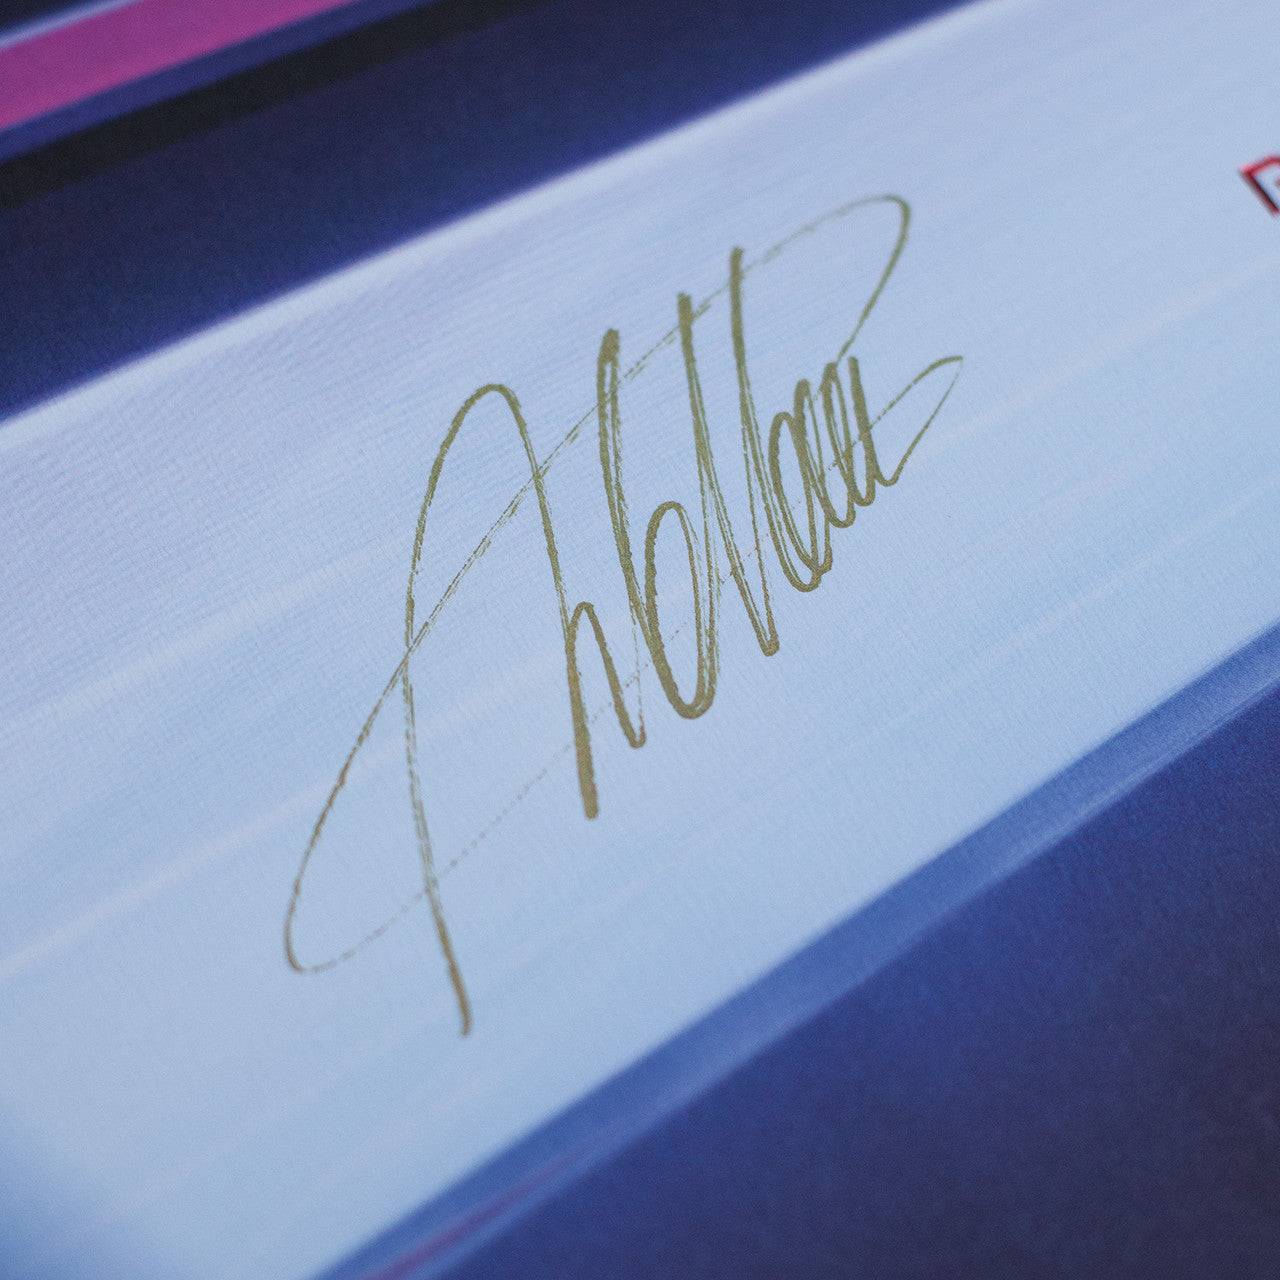 André Lotterer - Porsche 99X Electric in Tokyo - 2138 | Signed Collector’s Edition